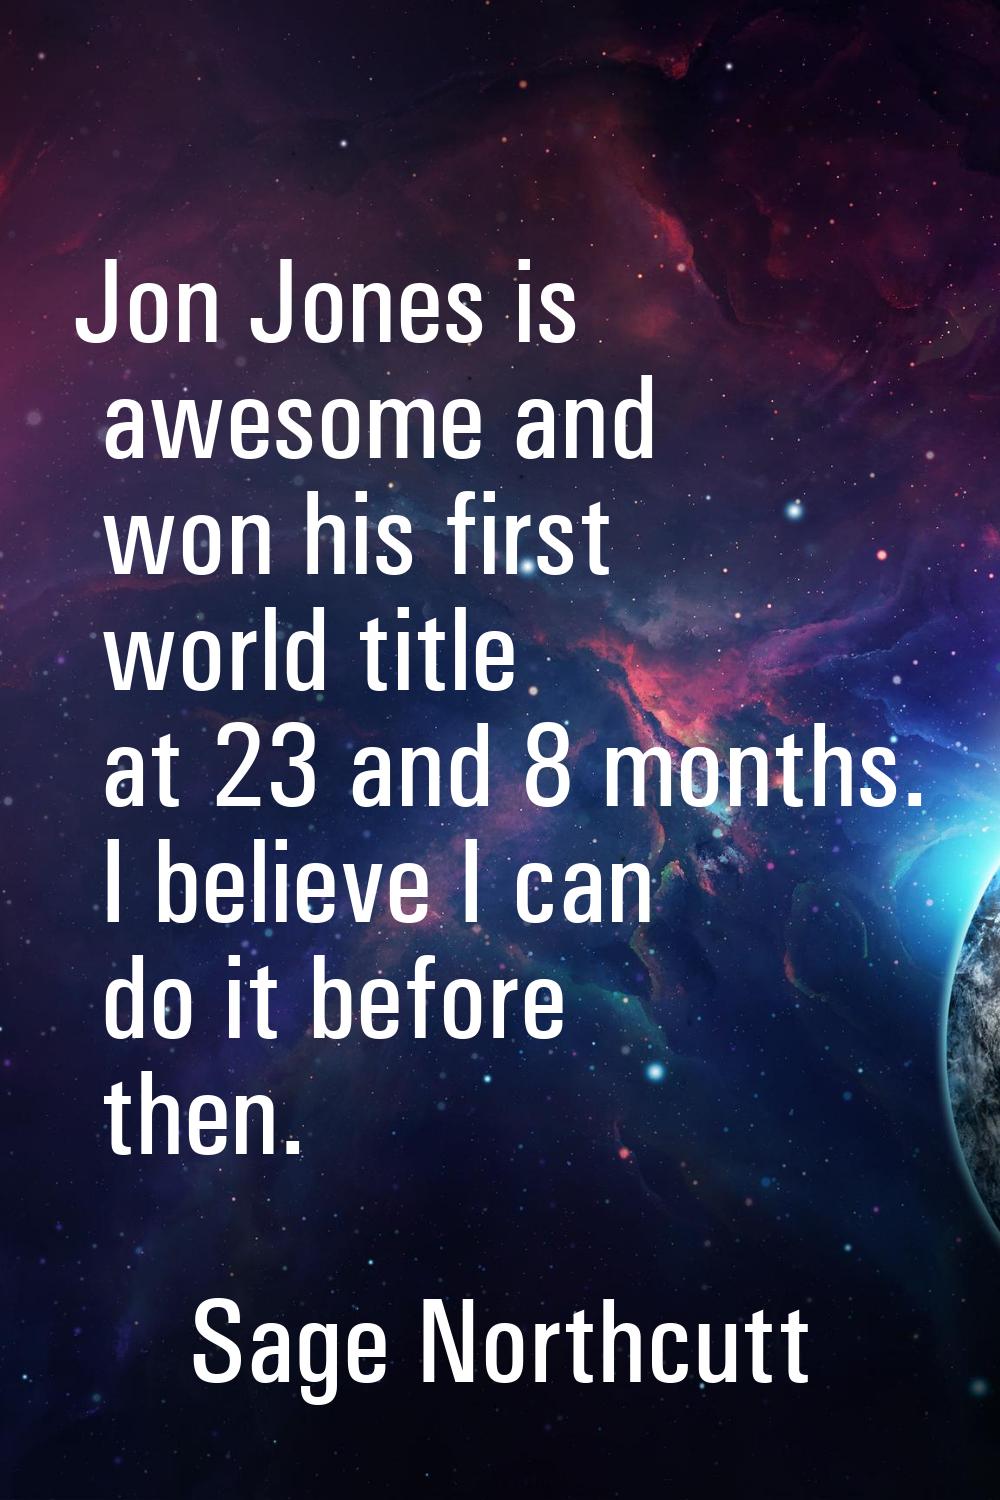 Jon Jones is awesome and won his first world title at 23 and 8 months. I believe I can do it before